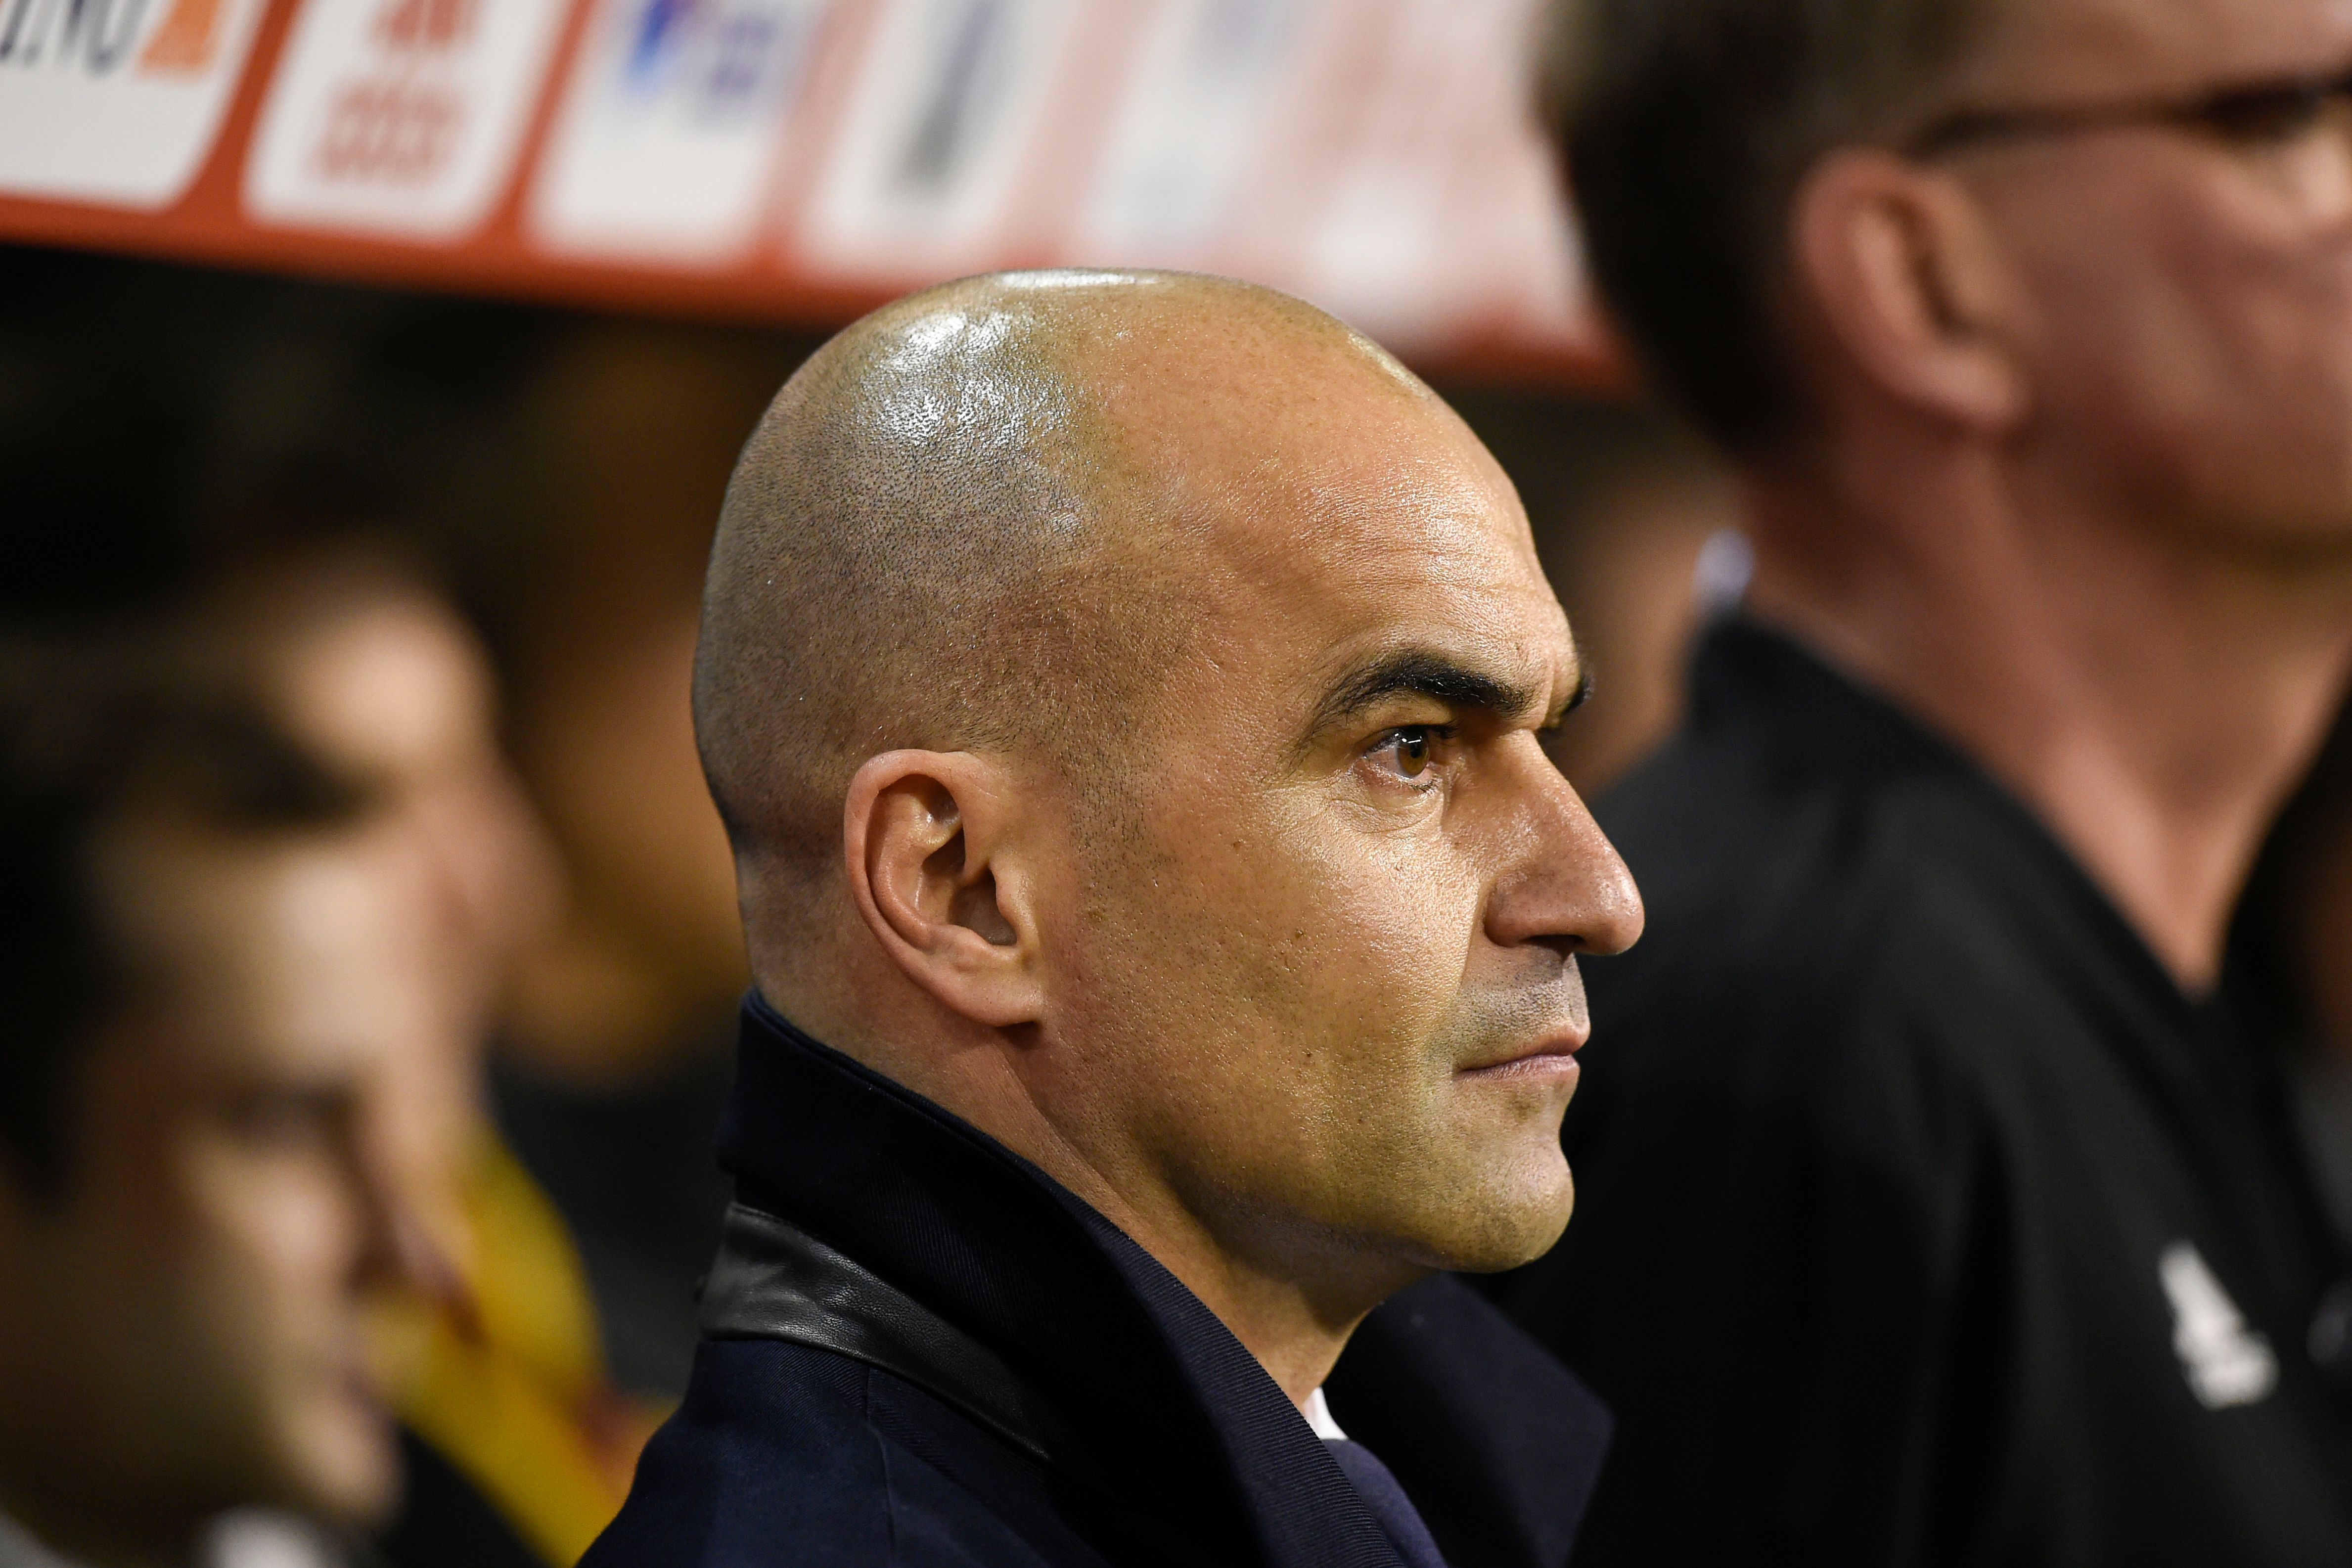 Belgium's coach Roberto Martinez looks on at the start of the Euro 2020 football qualification match between Belgium and Russia at the Roi Baudouin stadium, in Brussels on March 21, 2019. (Photo by JOHN THYS / AFP)        (Photo credit should read JOHN THYS/AFP/Getty Images)